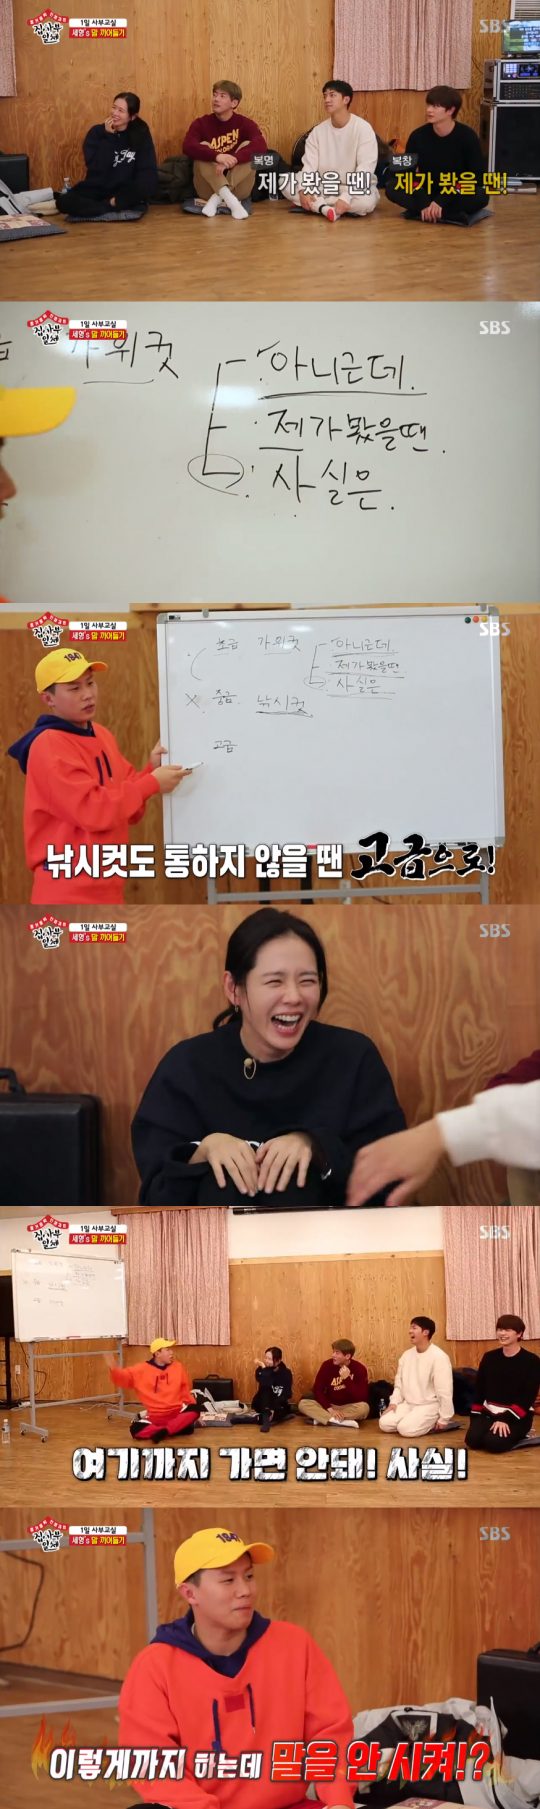 Yang Se-hyeong delivered a honey tip for Speaking in on SBS All The Butlers broadcast on the 9th.On the day of the broadcast, Lee Seung-gi, Yang Se-hyeong, Yook Sungjae and Lee Sang-yoon left Son Ye-jin and MT to commemorate the first anniversary of All The Butlers.Son Ye-jin prepared a time to become a master, saying, Everyone has something to learn.Yang Se-hyeong lectured on the know-how of talking accumulated during the broadcast.The secret to the proper intervention of someone in conversation. Yang Se-hyeong first divided into beginner, intermediate, and advanced.In the beginners, the keywords were summarized as Ah, J. and Sa. Ah means no, but and I means when I saw.The company was a way to break the conversation, saying the fact was the way to go.The intermediate group described it as fishing cut. Yang Se-hyeong explained that the other person catches the word and continues with it.When Yook Sungjae said, I like fishing in the Zhangye situation, Yang Se-hyeong immediately intervened in the conversation saying, Im fishing.Yang Se-hyeong summarized that taking away the others words is the key.In the last advanced stage, Yang Se-hyeong suggested the keyword Action Cut.When the members postponed the Zhangye situation, Yang Se-hyeong focused his attention on excessive action.Lee Seung-gi said, This is a deterrent. Yang Se-hyeong said, If you do not tell me, you should not do this.Son Ye-jin also laughed loudly, saying, Its so funny.Lee Sang-yoon and Yook Sungjae were noticed for their talking handmade aspect by learning Yang Se-hyeongs tips right away.When I did so well, Yang Se-hyeong was rather embarrassed.